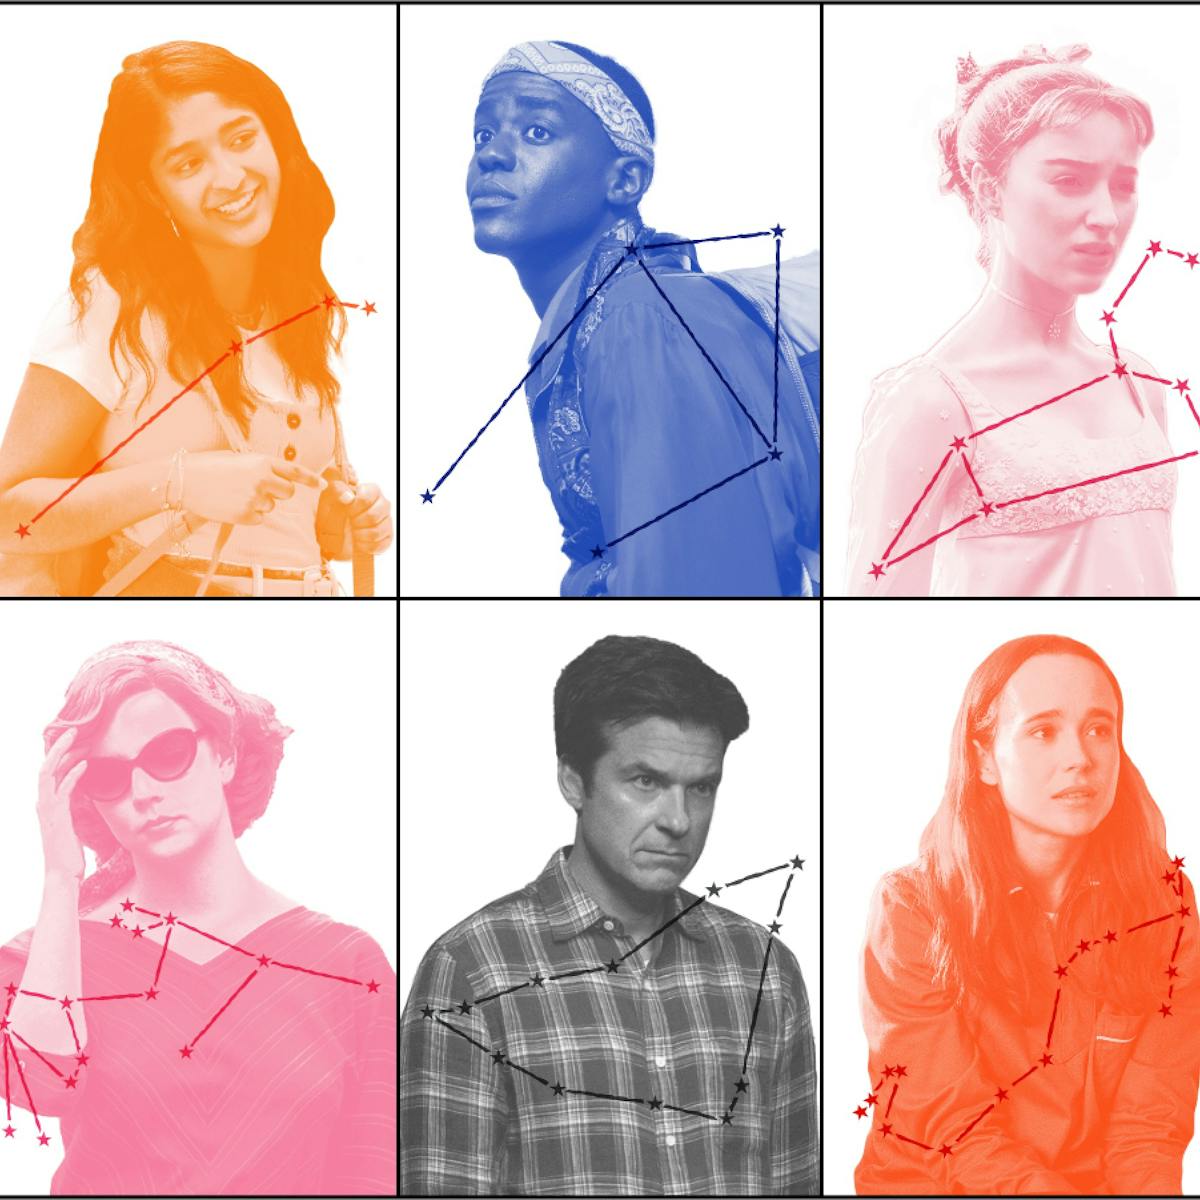 A grid of 12 rectangles, each featuring a character from a Netflix show with their corresponding zodiac constellation overlaid.  